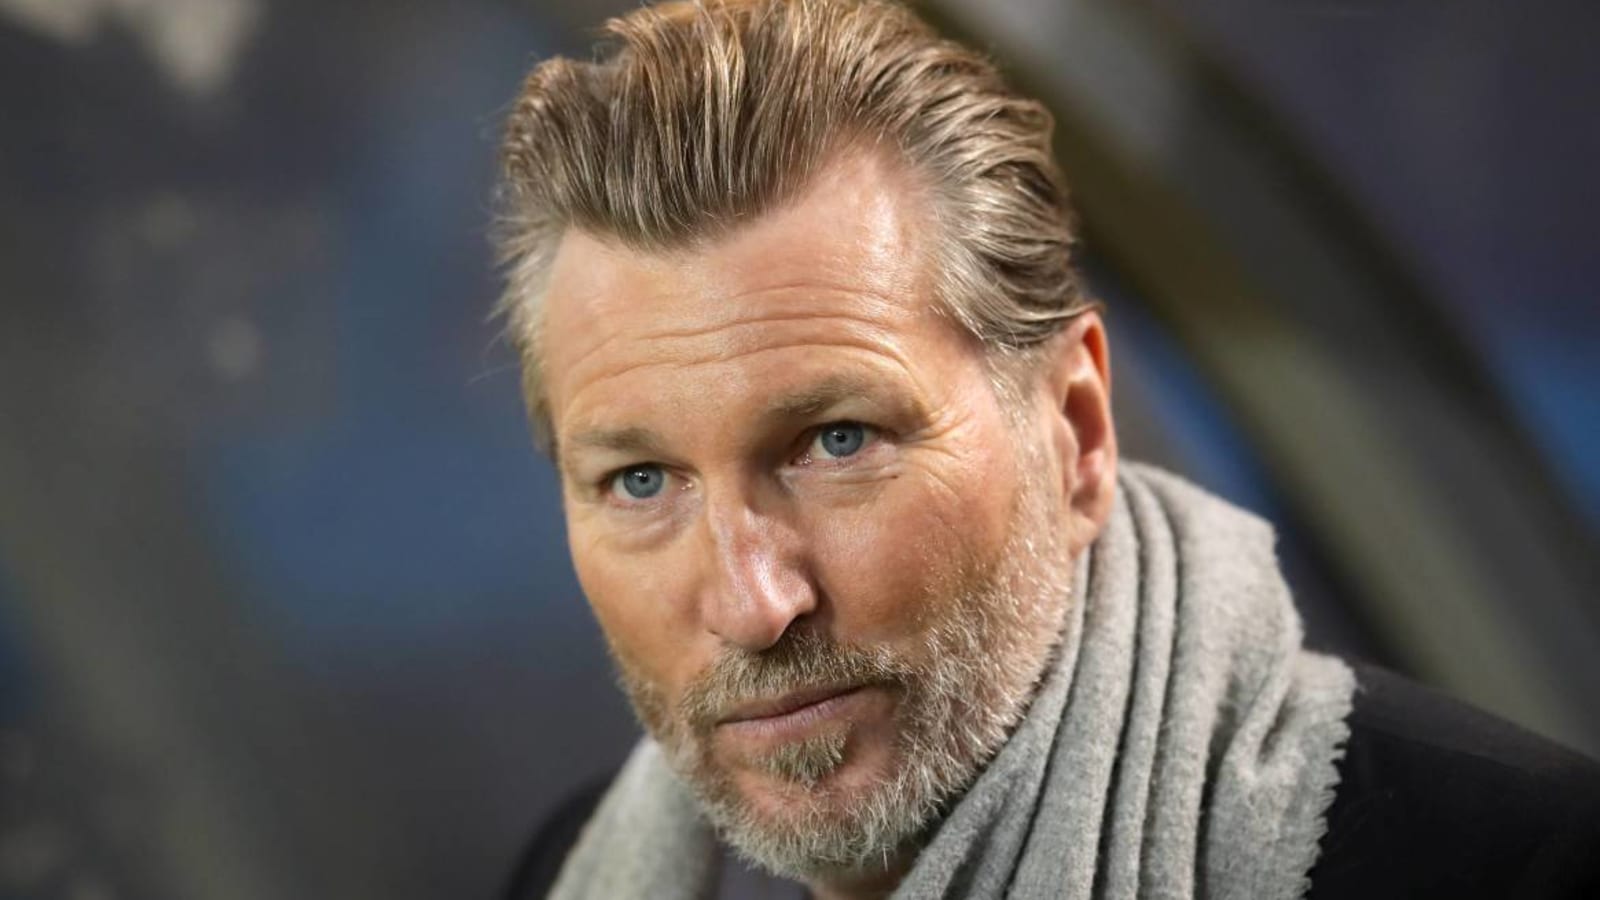 &#39;I wanted to sign for Sunderland&#39; - Robbie Savage gives his side of Roy Keane voicemail story